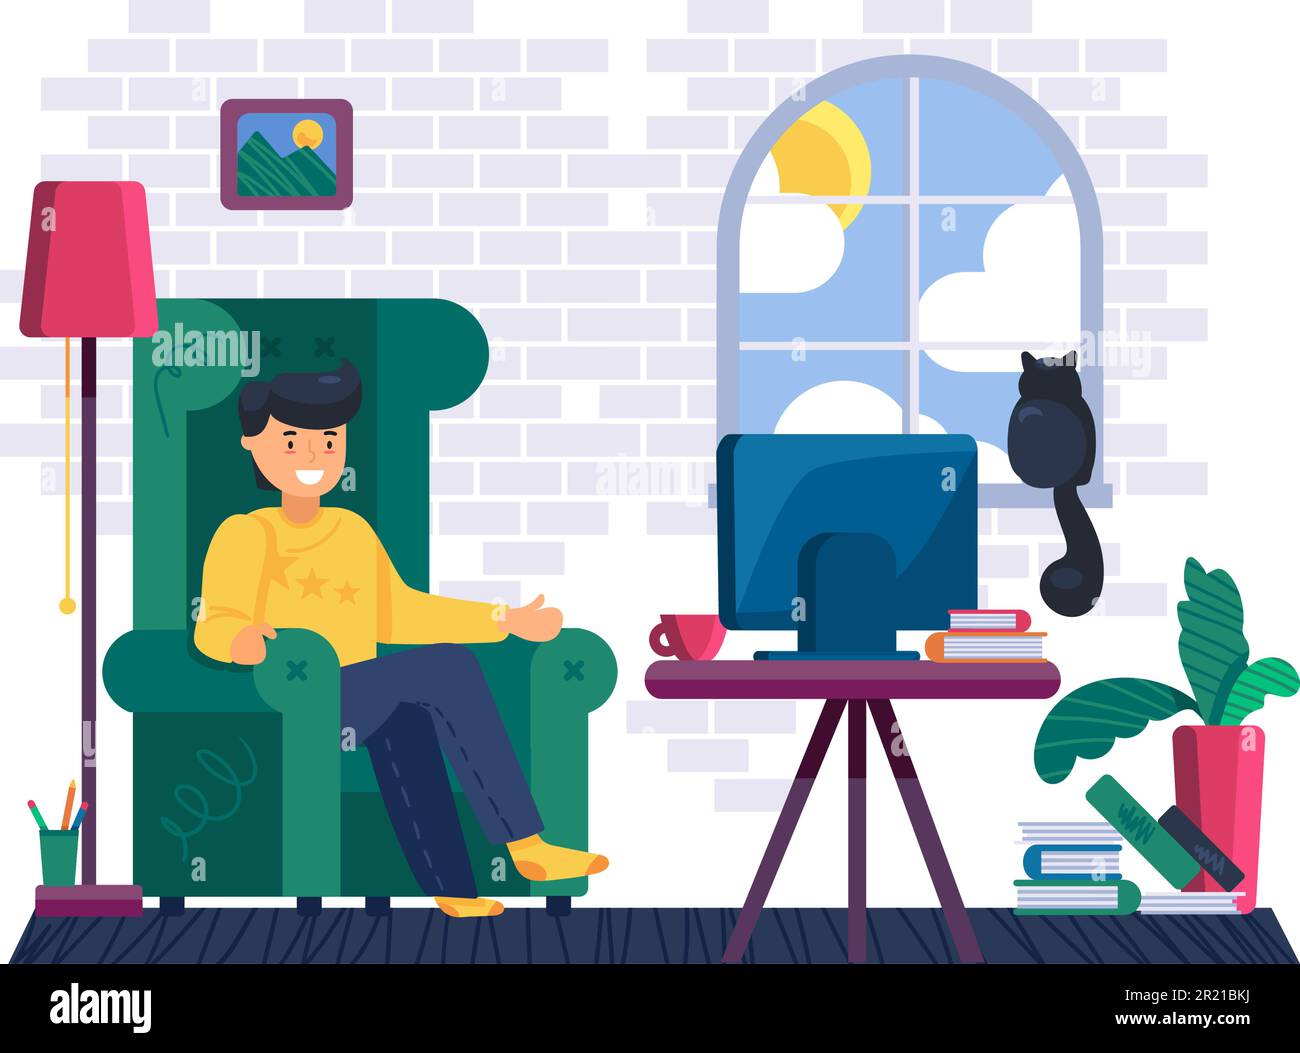 Man watching film on tv in living room vector. Young boy sitting in cozy armchair and watch streaming movie or series on television screen. Character Stock Vector